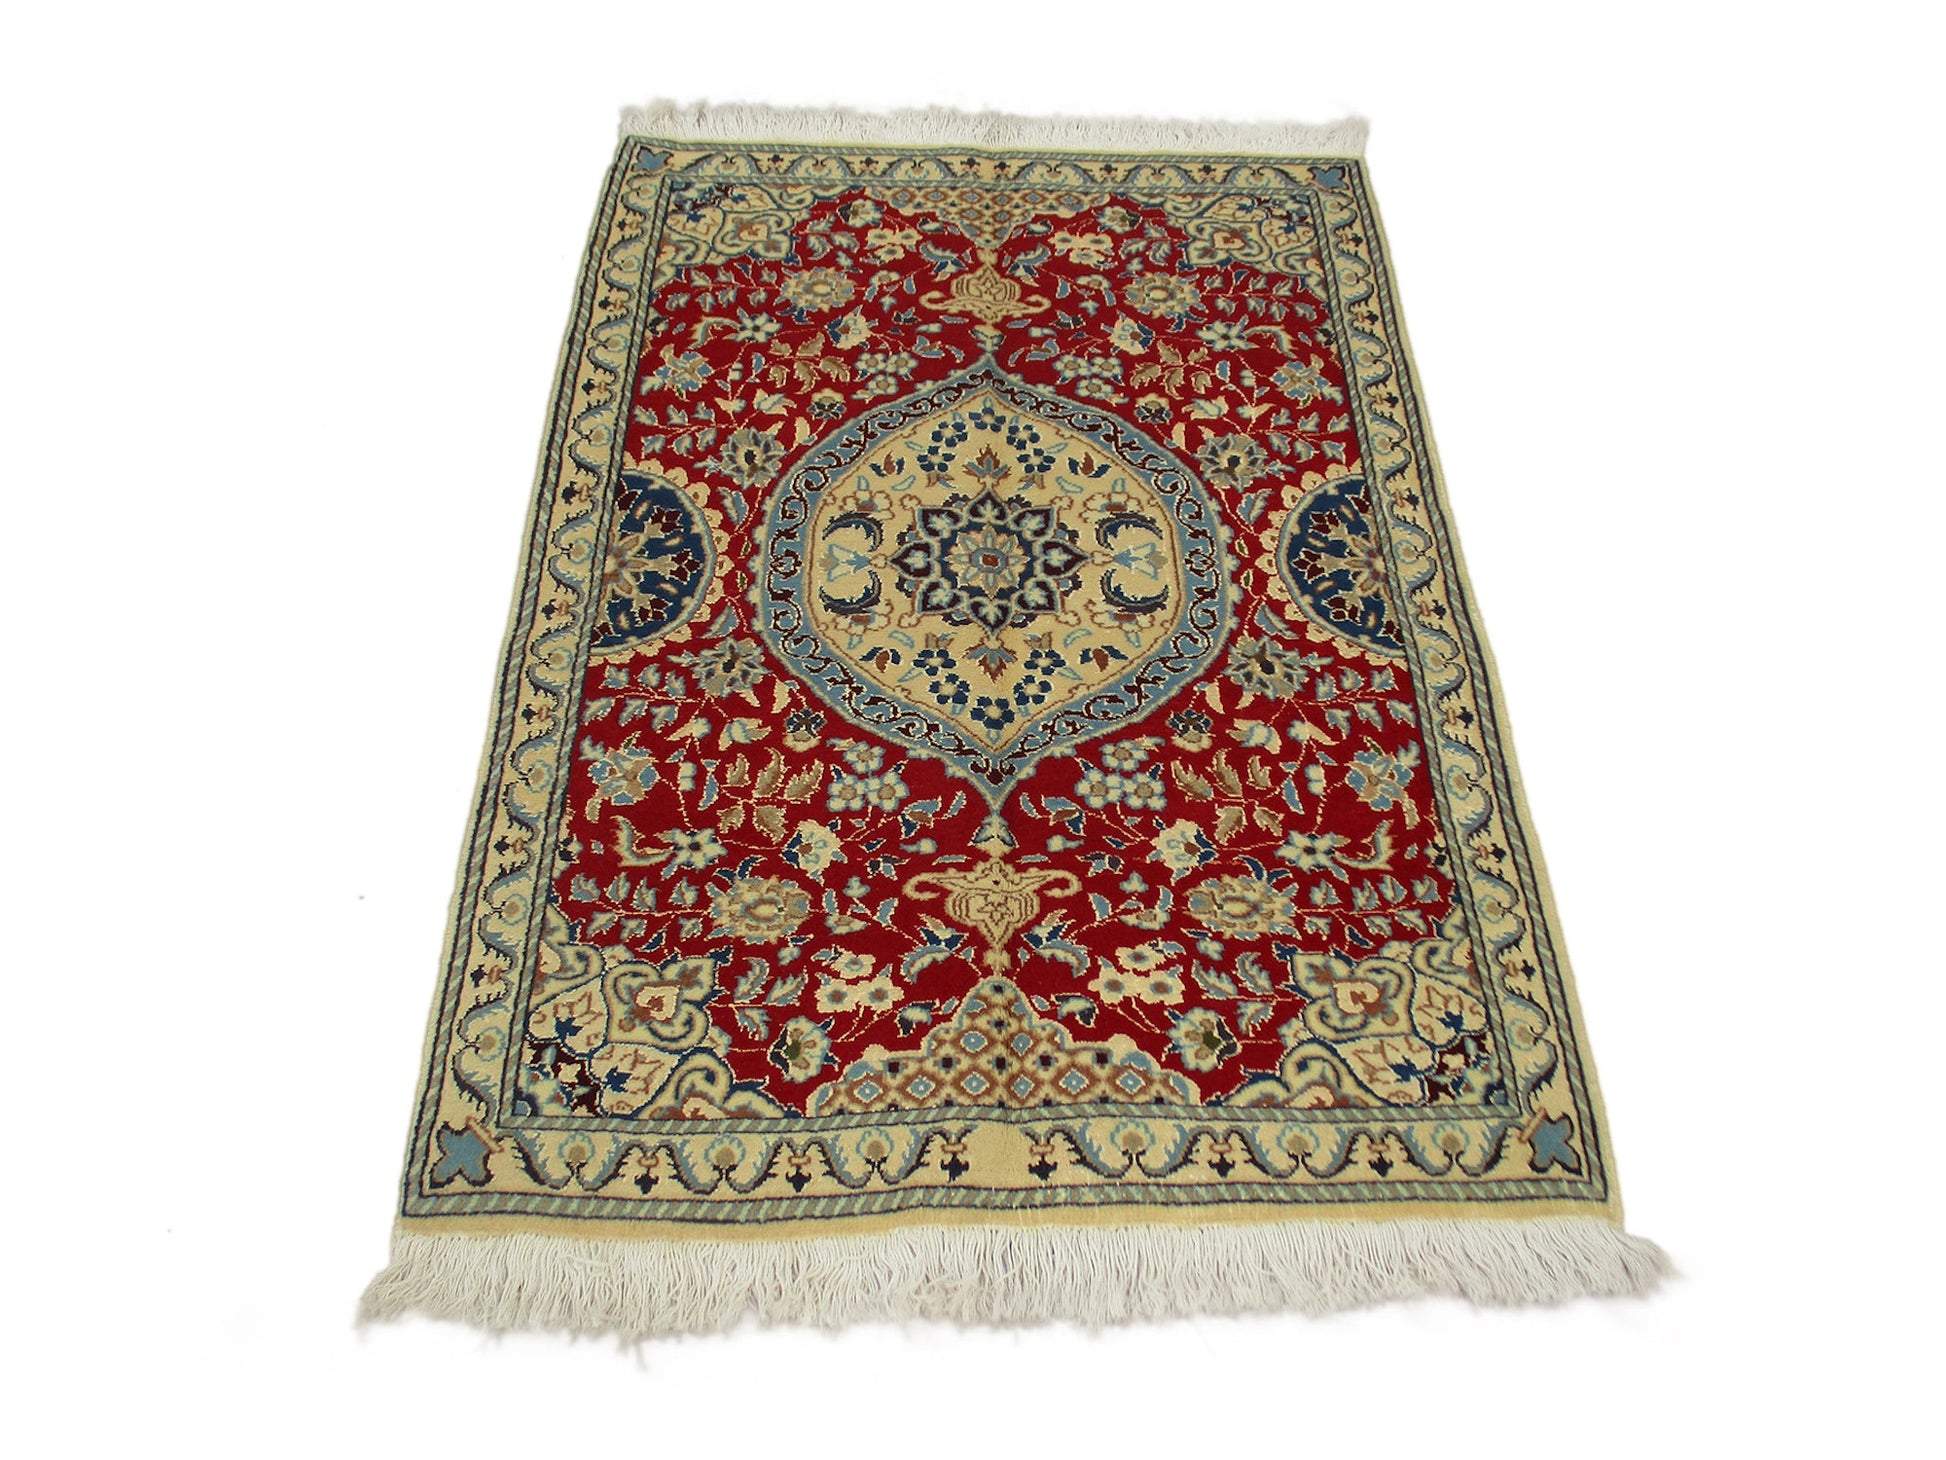 3 x 4 Feet Red Beige Turkish Caucasian Rug | Hand Woven Area Rug | Oriental Persian Rug | Living Room Rug | Accent Floral Pattern Wool Rug